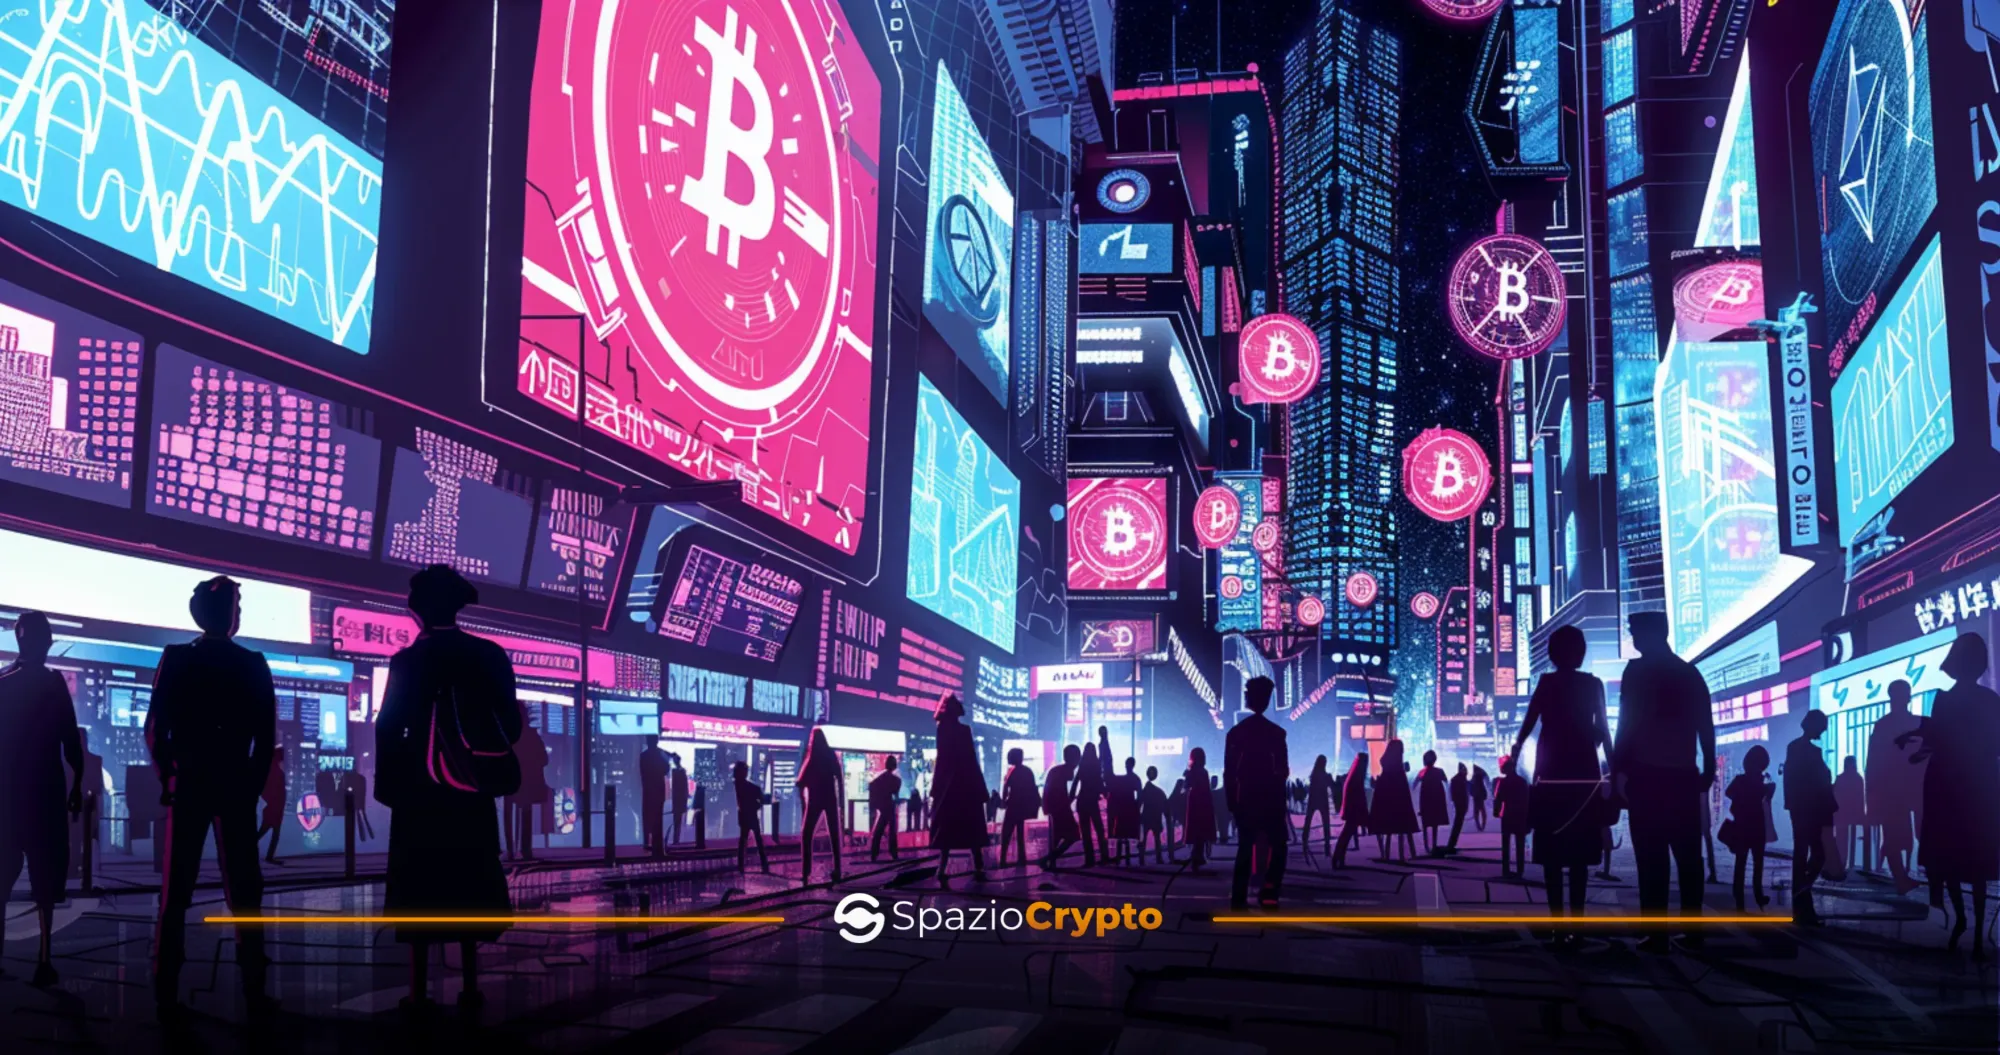 Cryptocurrency Sector No Longer Early Adopters, It's the Turn of the Early Majority - Spaziocrypto